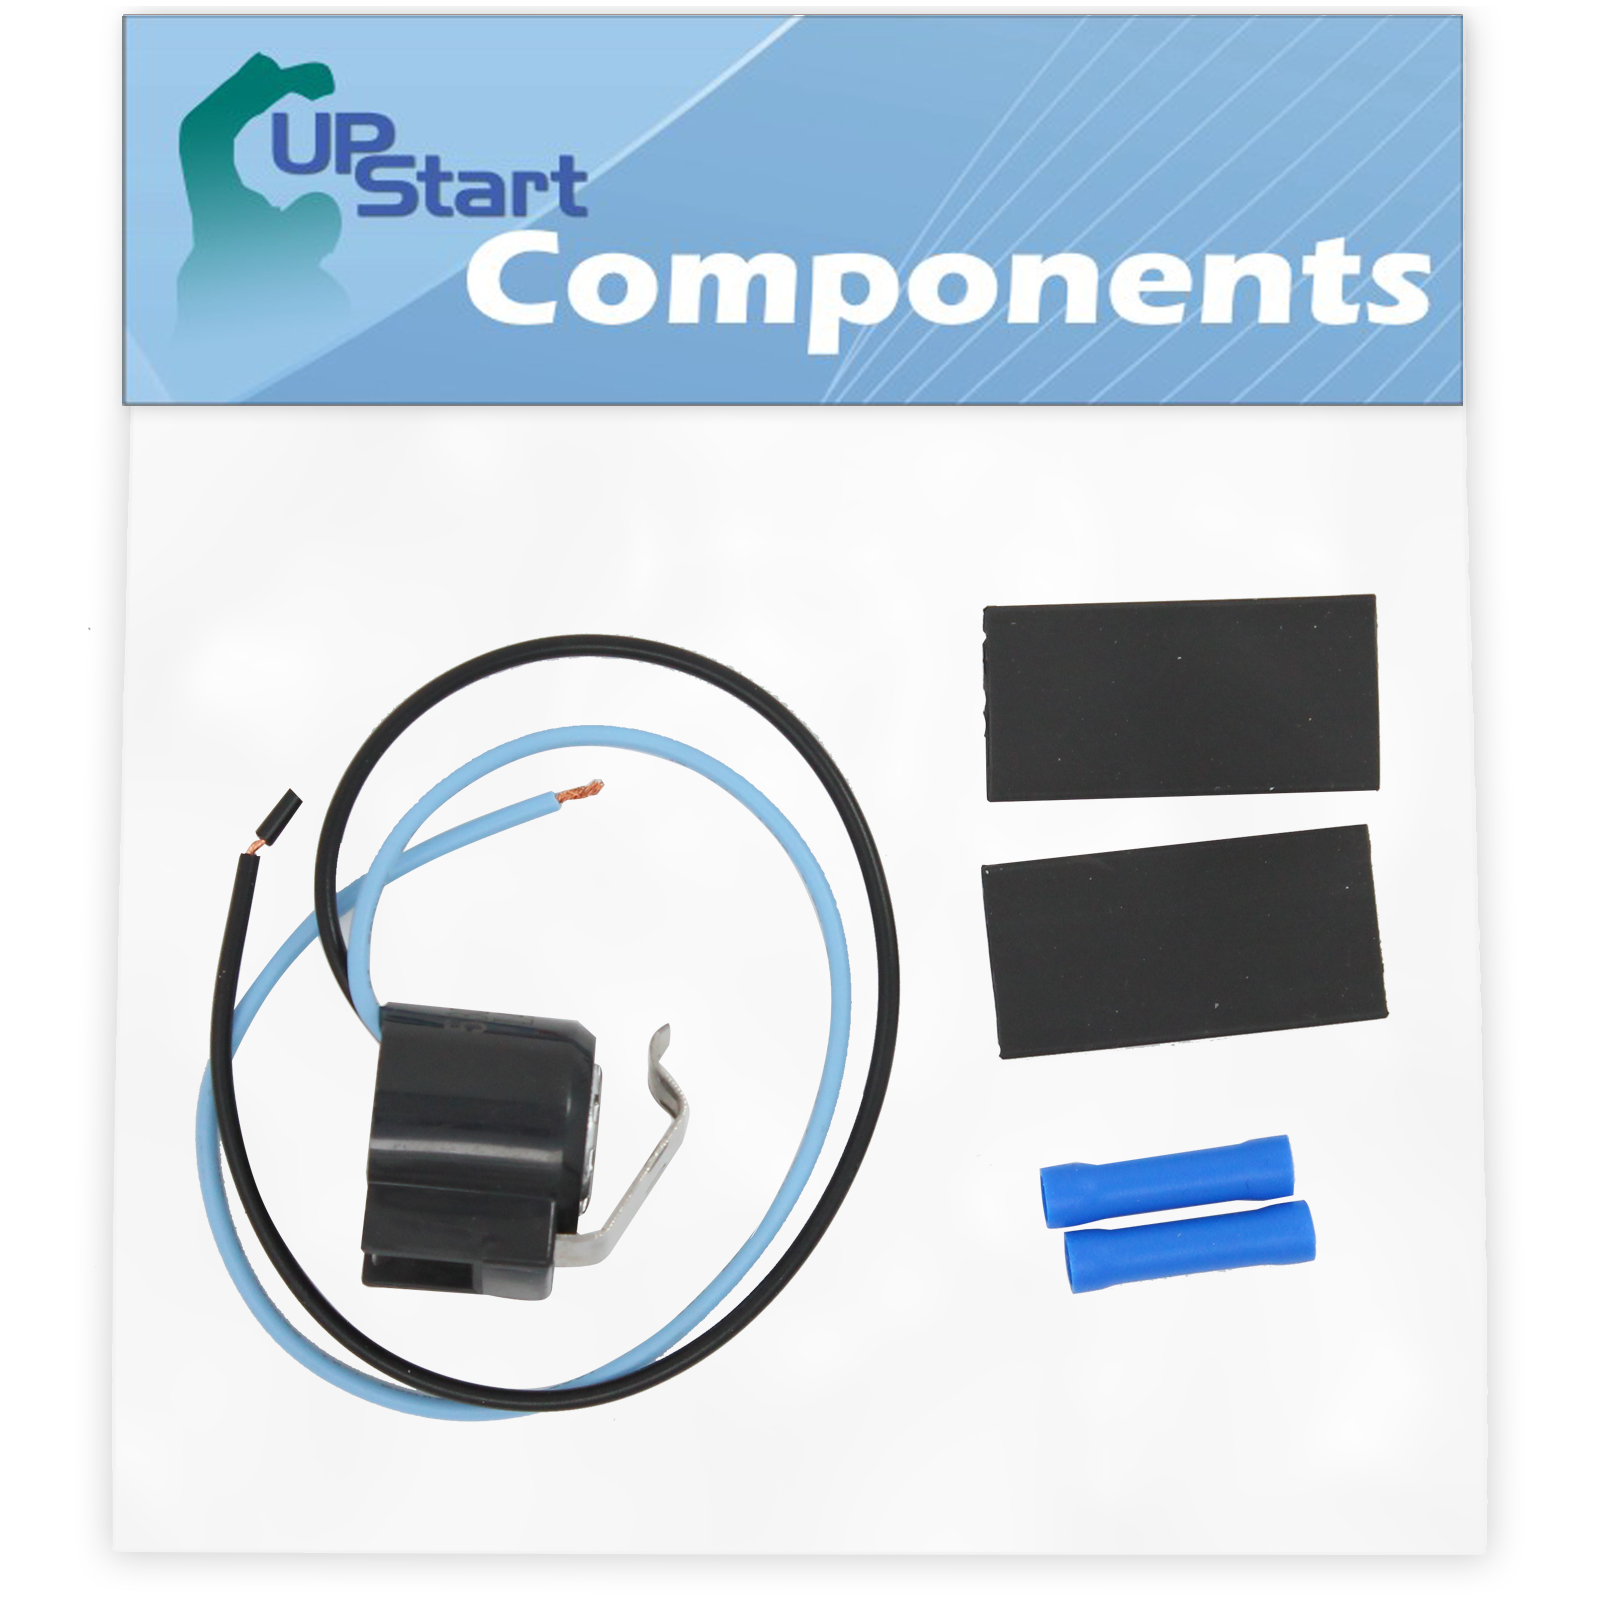 5303918214 Defrost Thermostat Replacement for Frigidaire FGHS2369KE1 Refrigerator - Compatible with 5303918214 Defrost Thermostat Kit - UpStart Components Brand - image 1 of 2